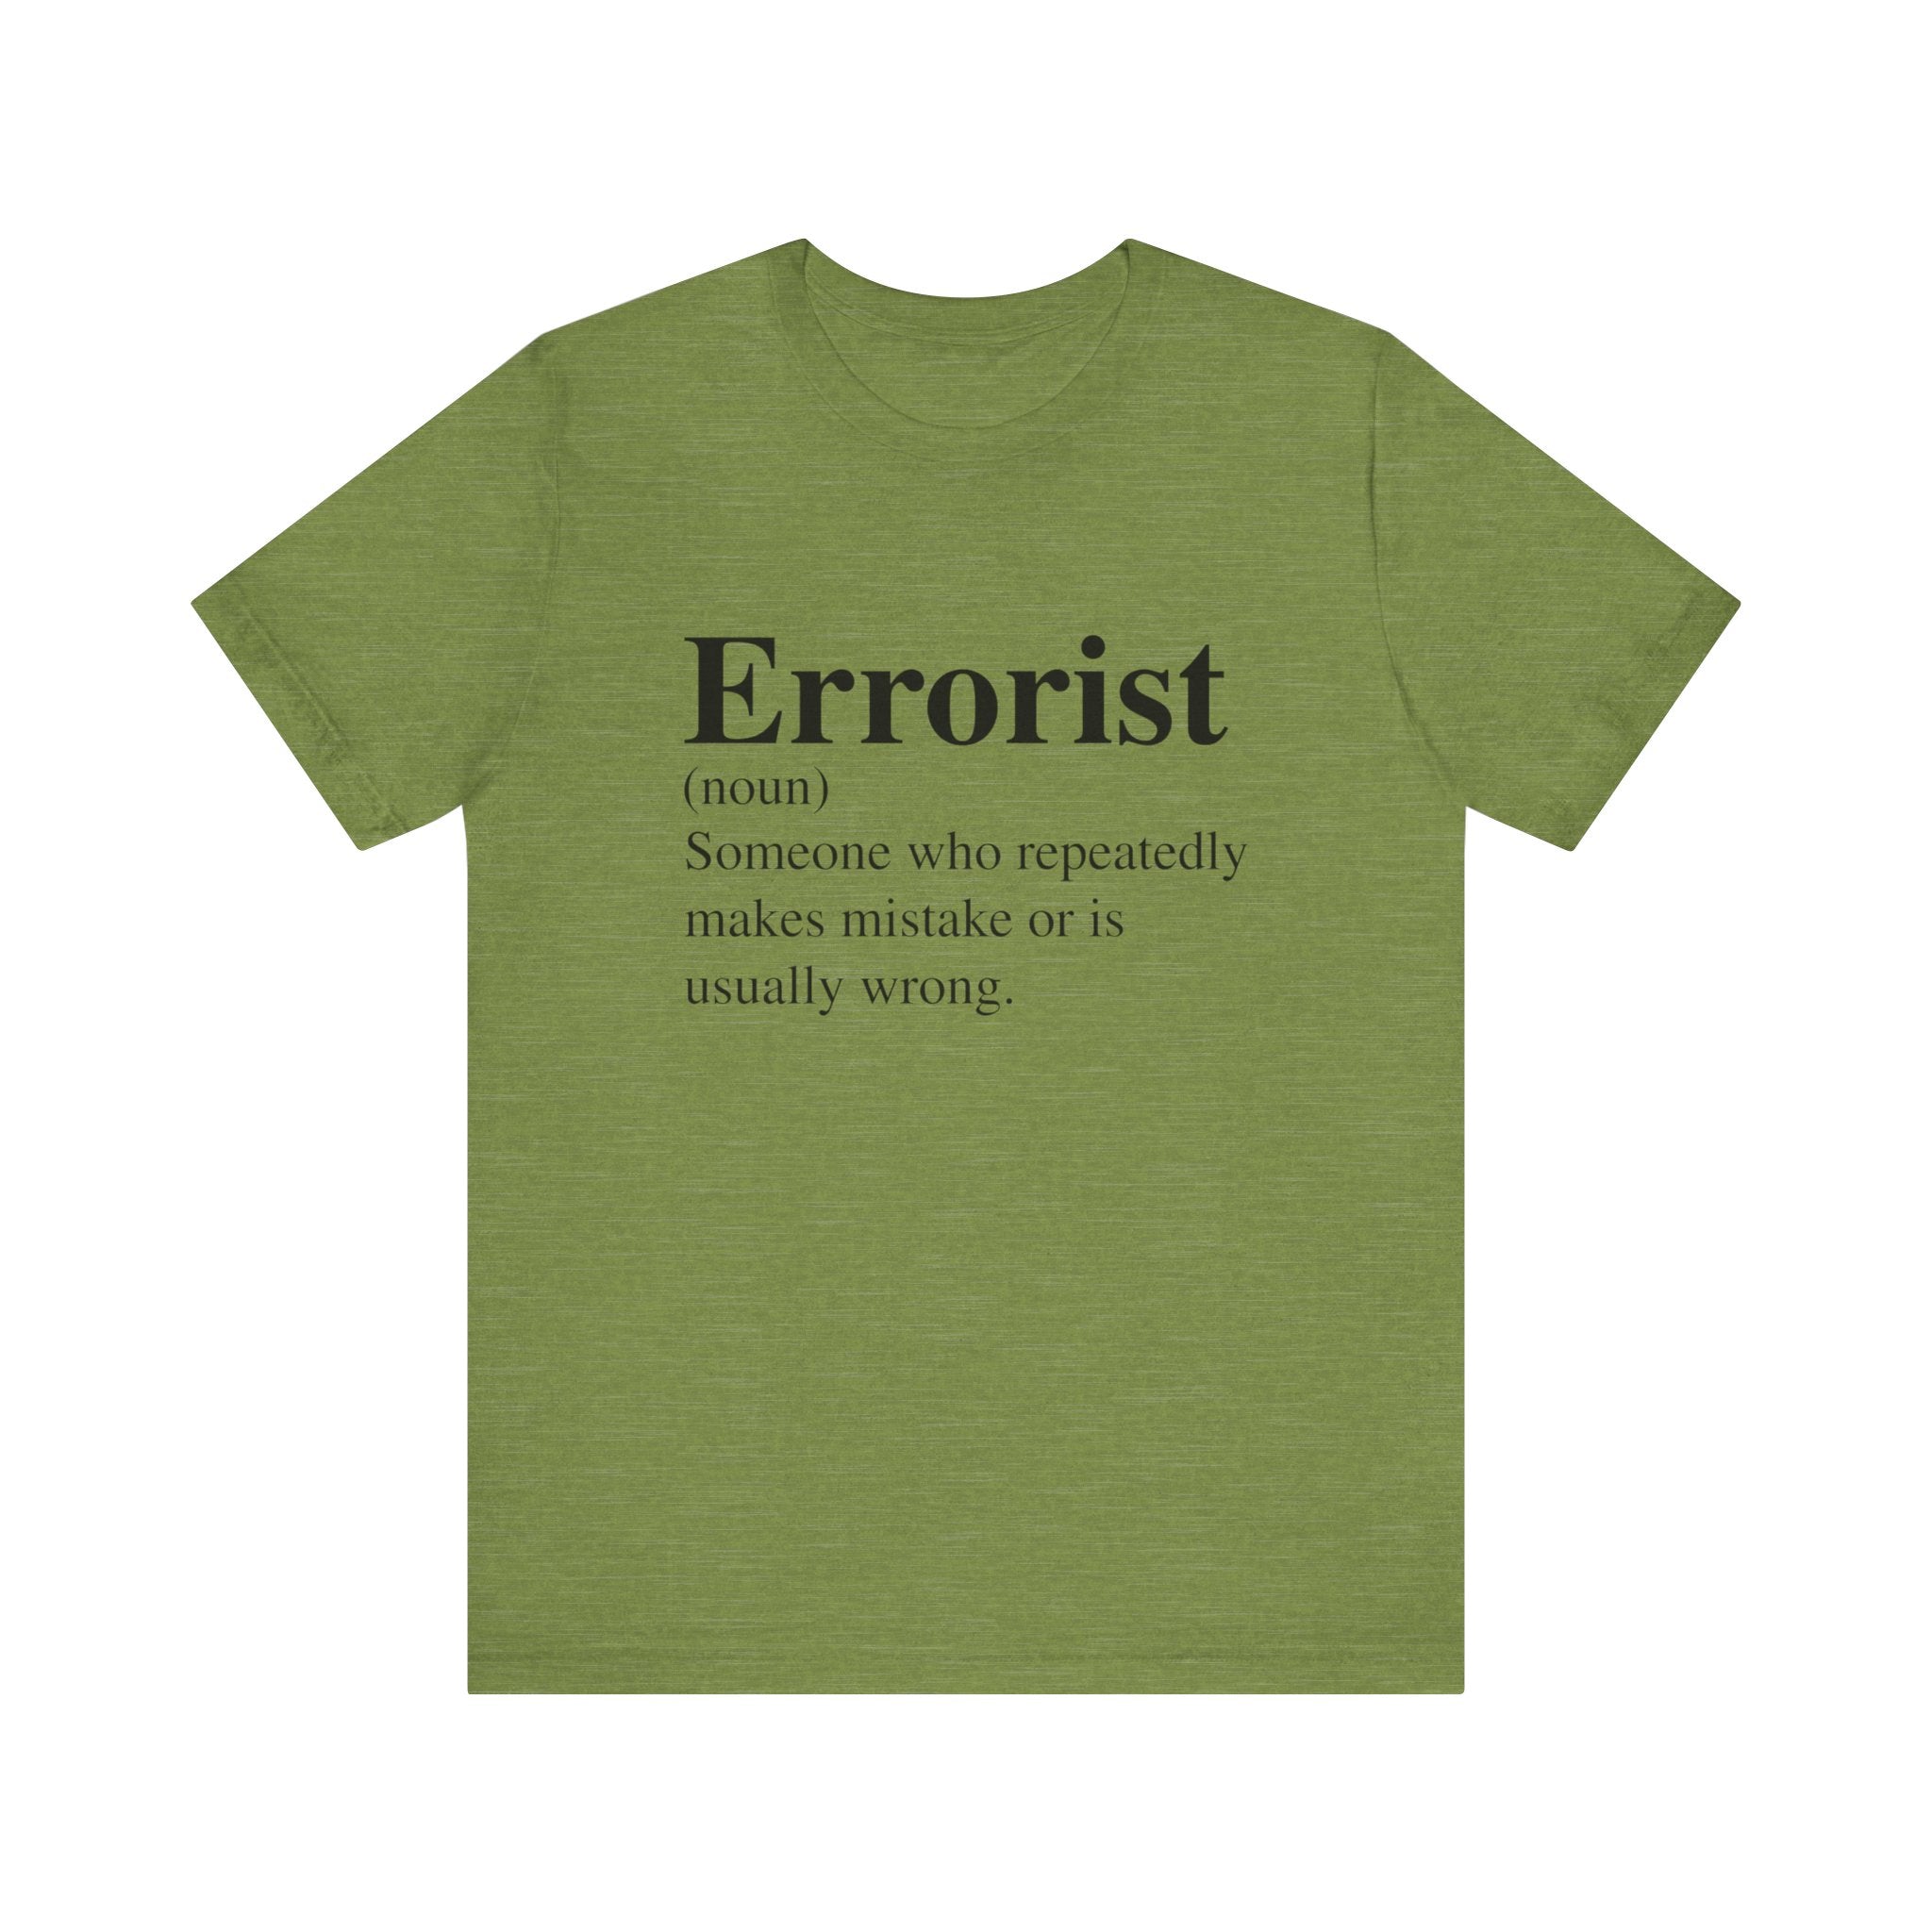 Errorist T-Shirt with the word "errorist" defined as a noun meaning someone who repeatedly makes mistakes or is usually wrong, printed in black text on soft cotton.